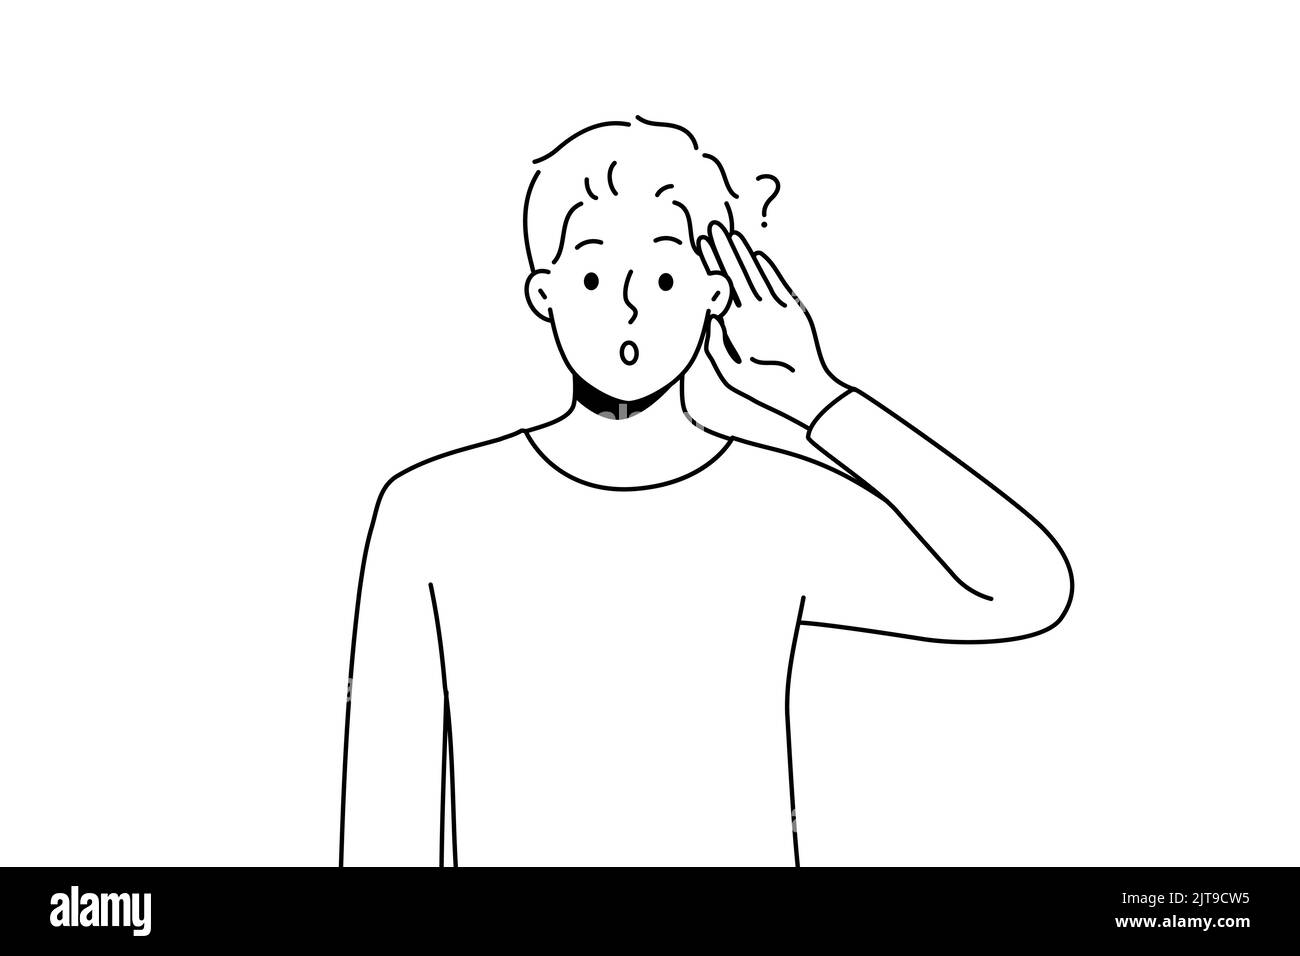 Young man make hand gesture listening to news on information. Confused male wonder about gossip or hearsay. Vector illustration.  Stock Vector